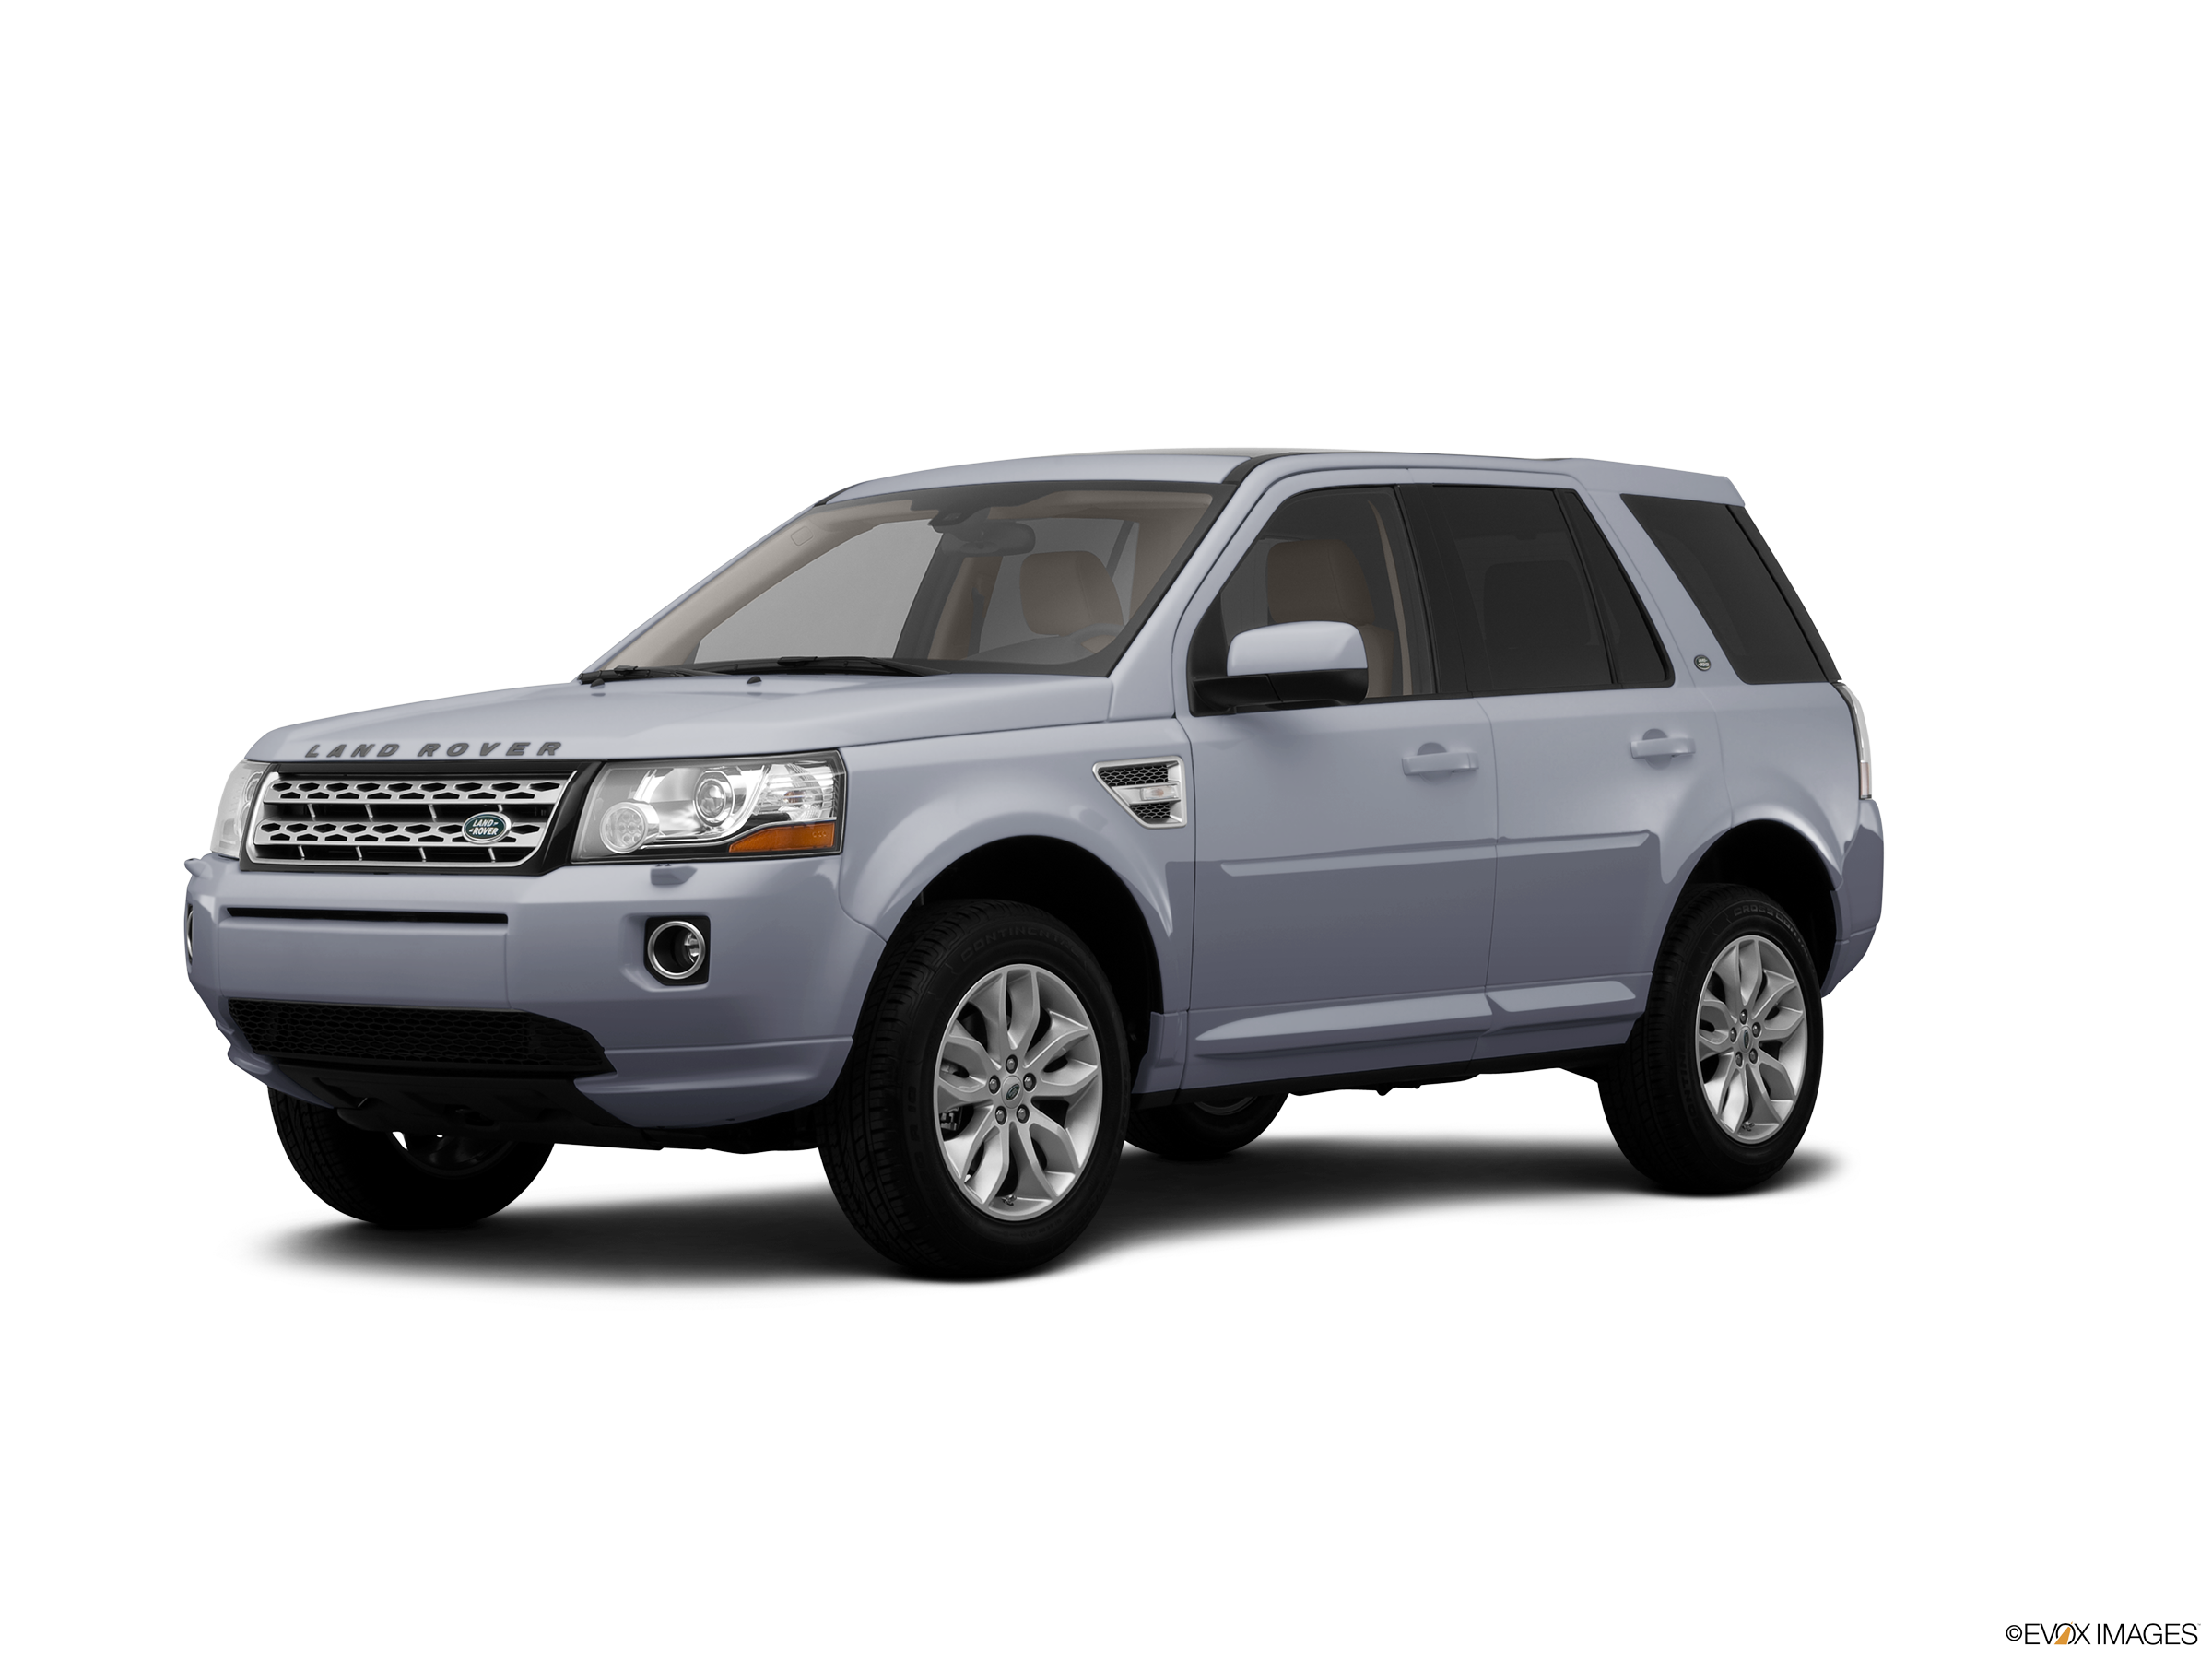 Used 2013 LR2 4D Sport Land Utility Book Kelley Blue | Prices Rover